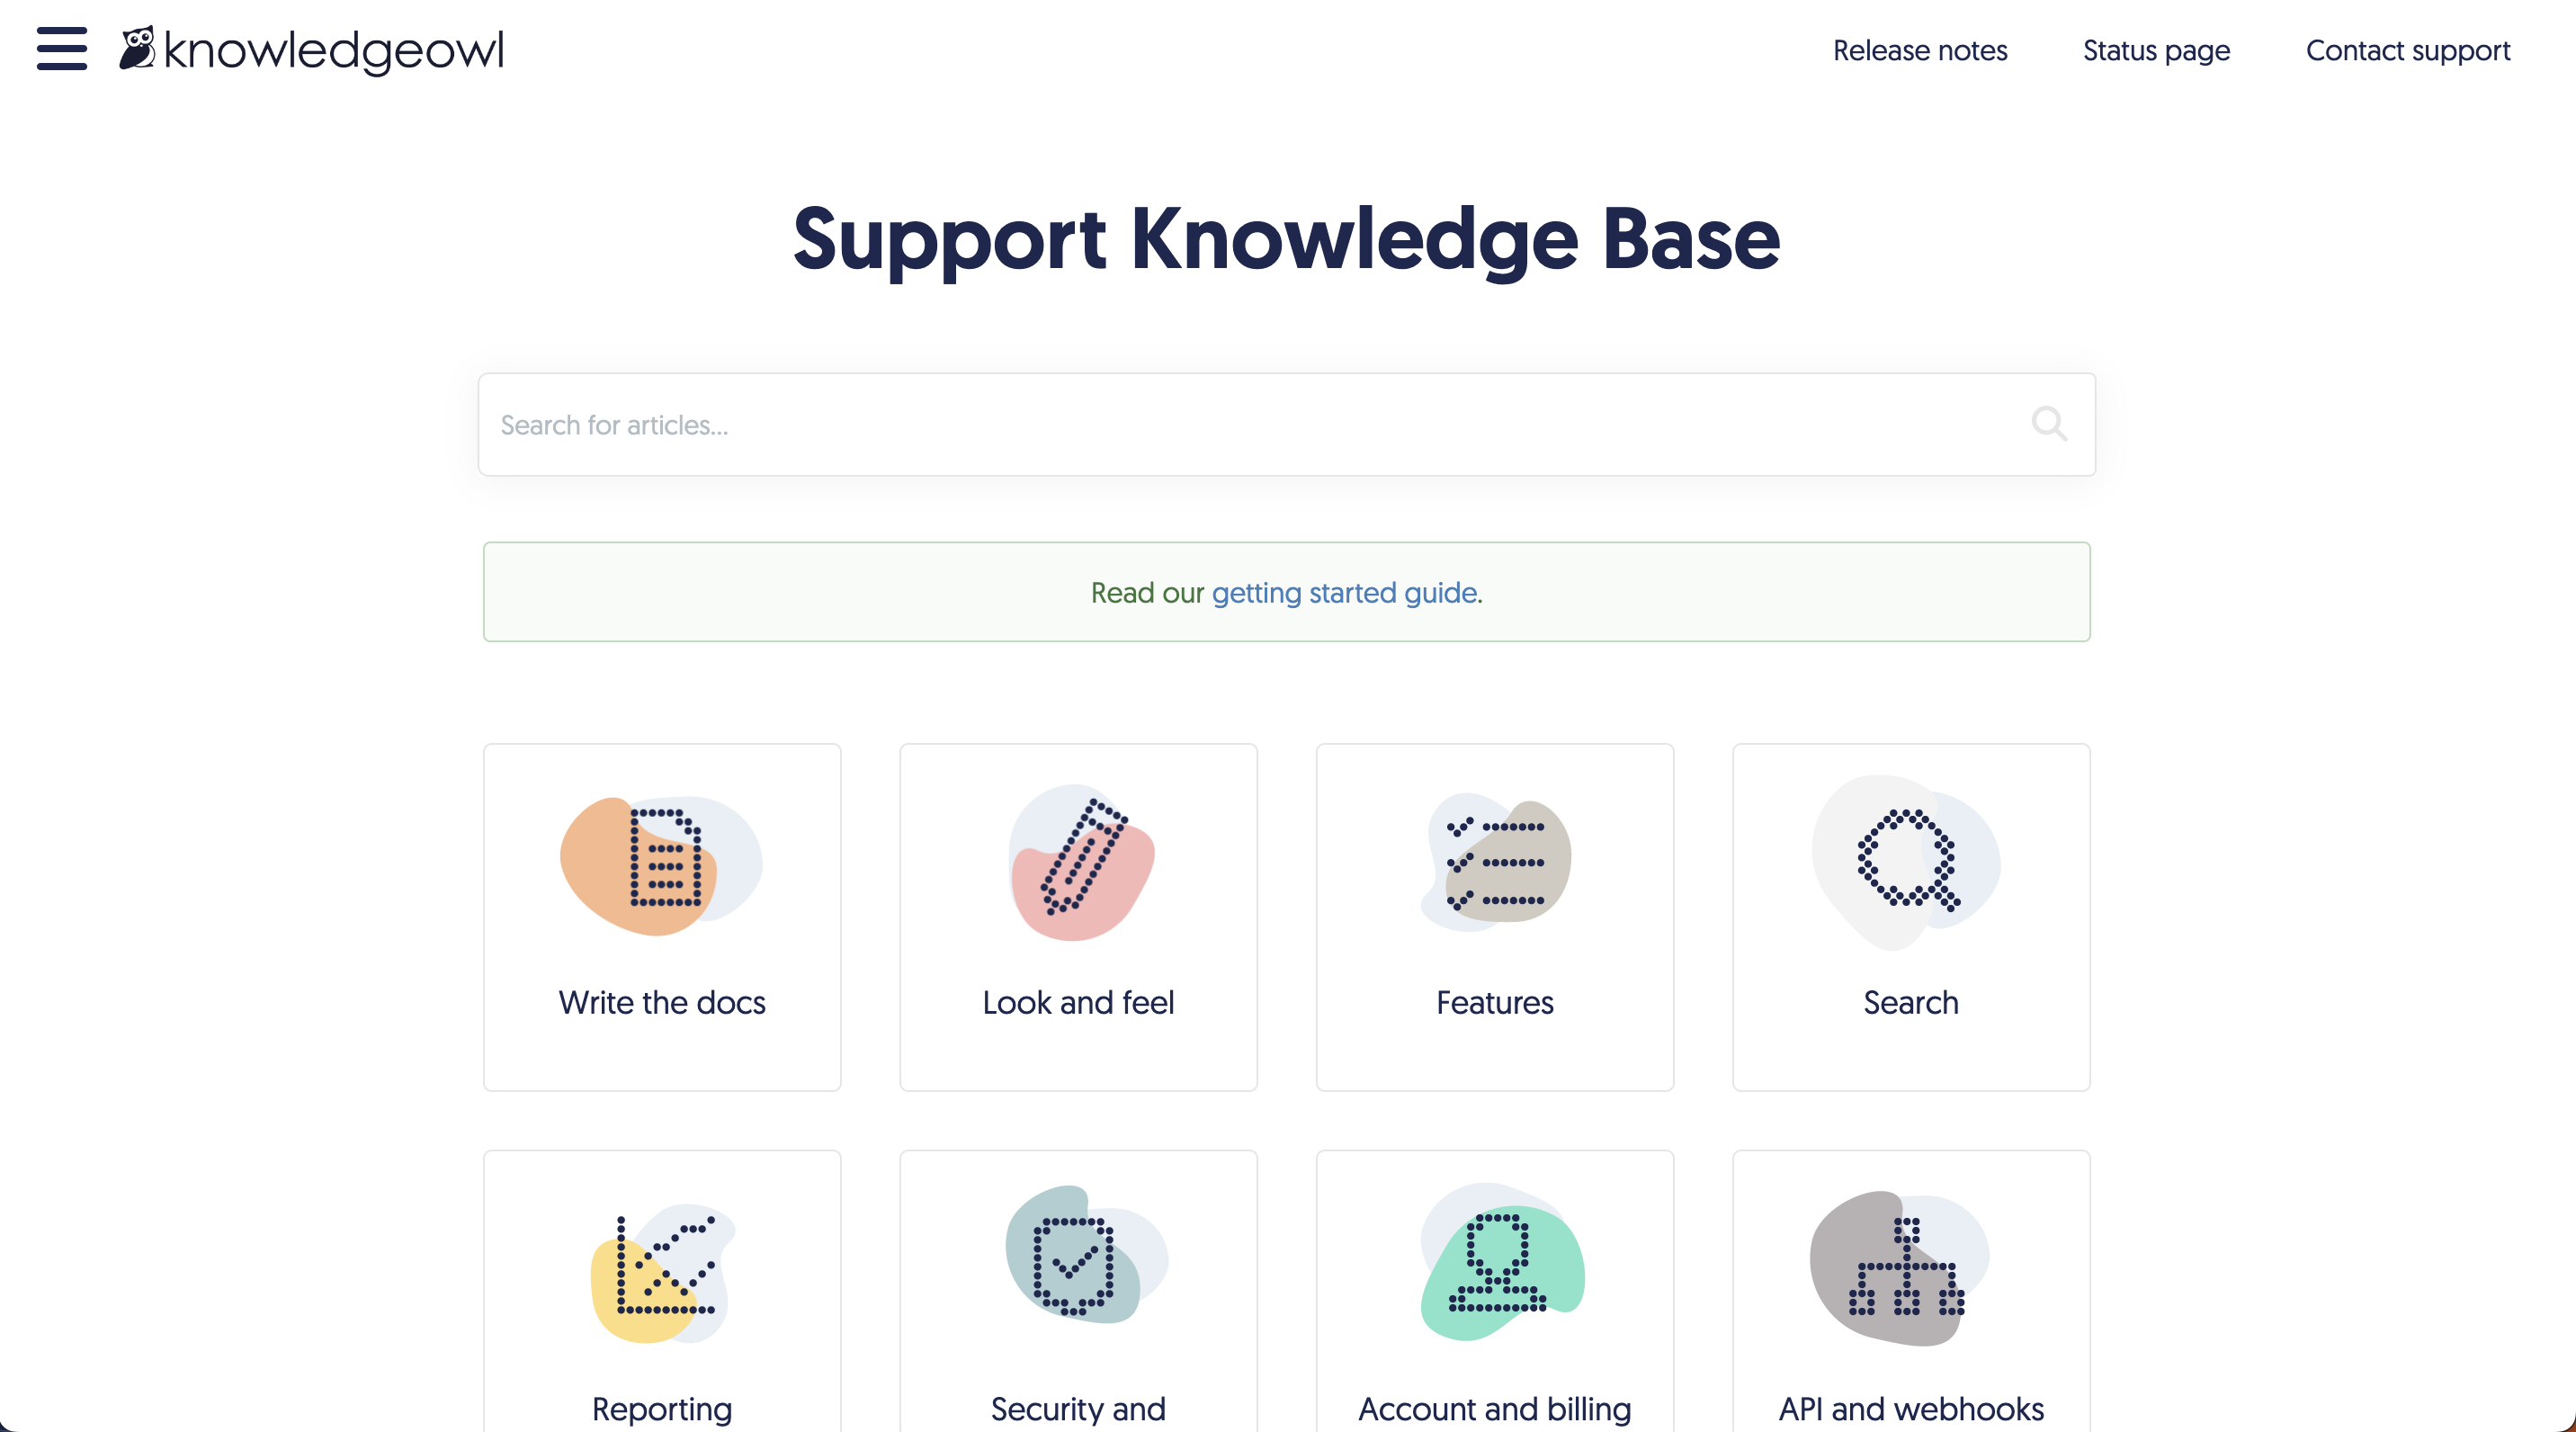 KnowledgeOwl Support Knowledge Base Homepage